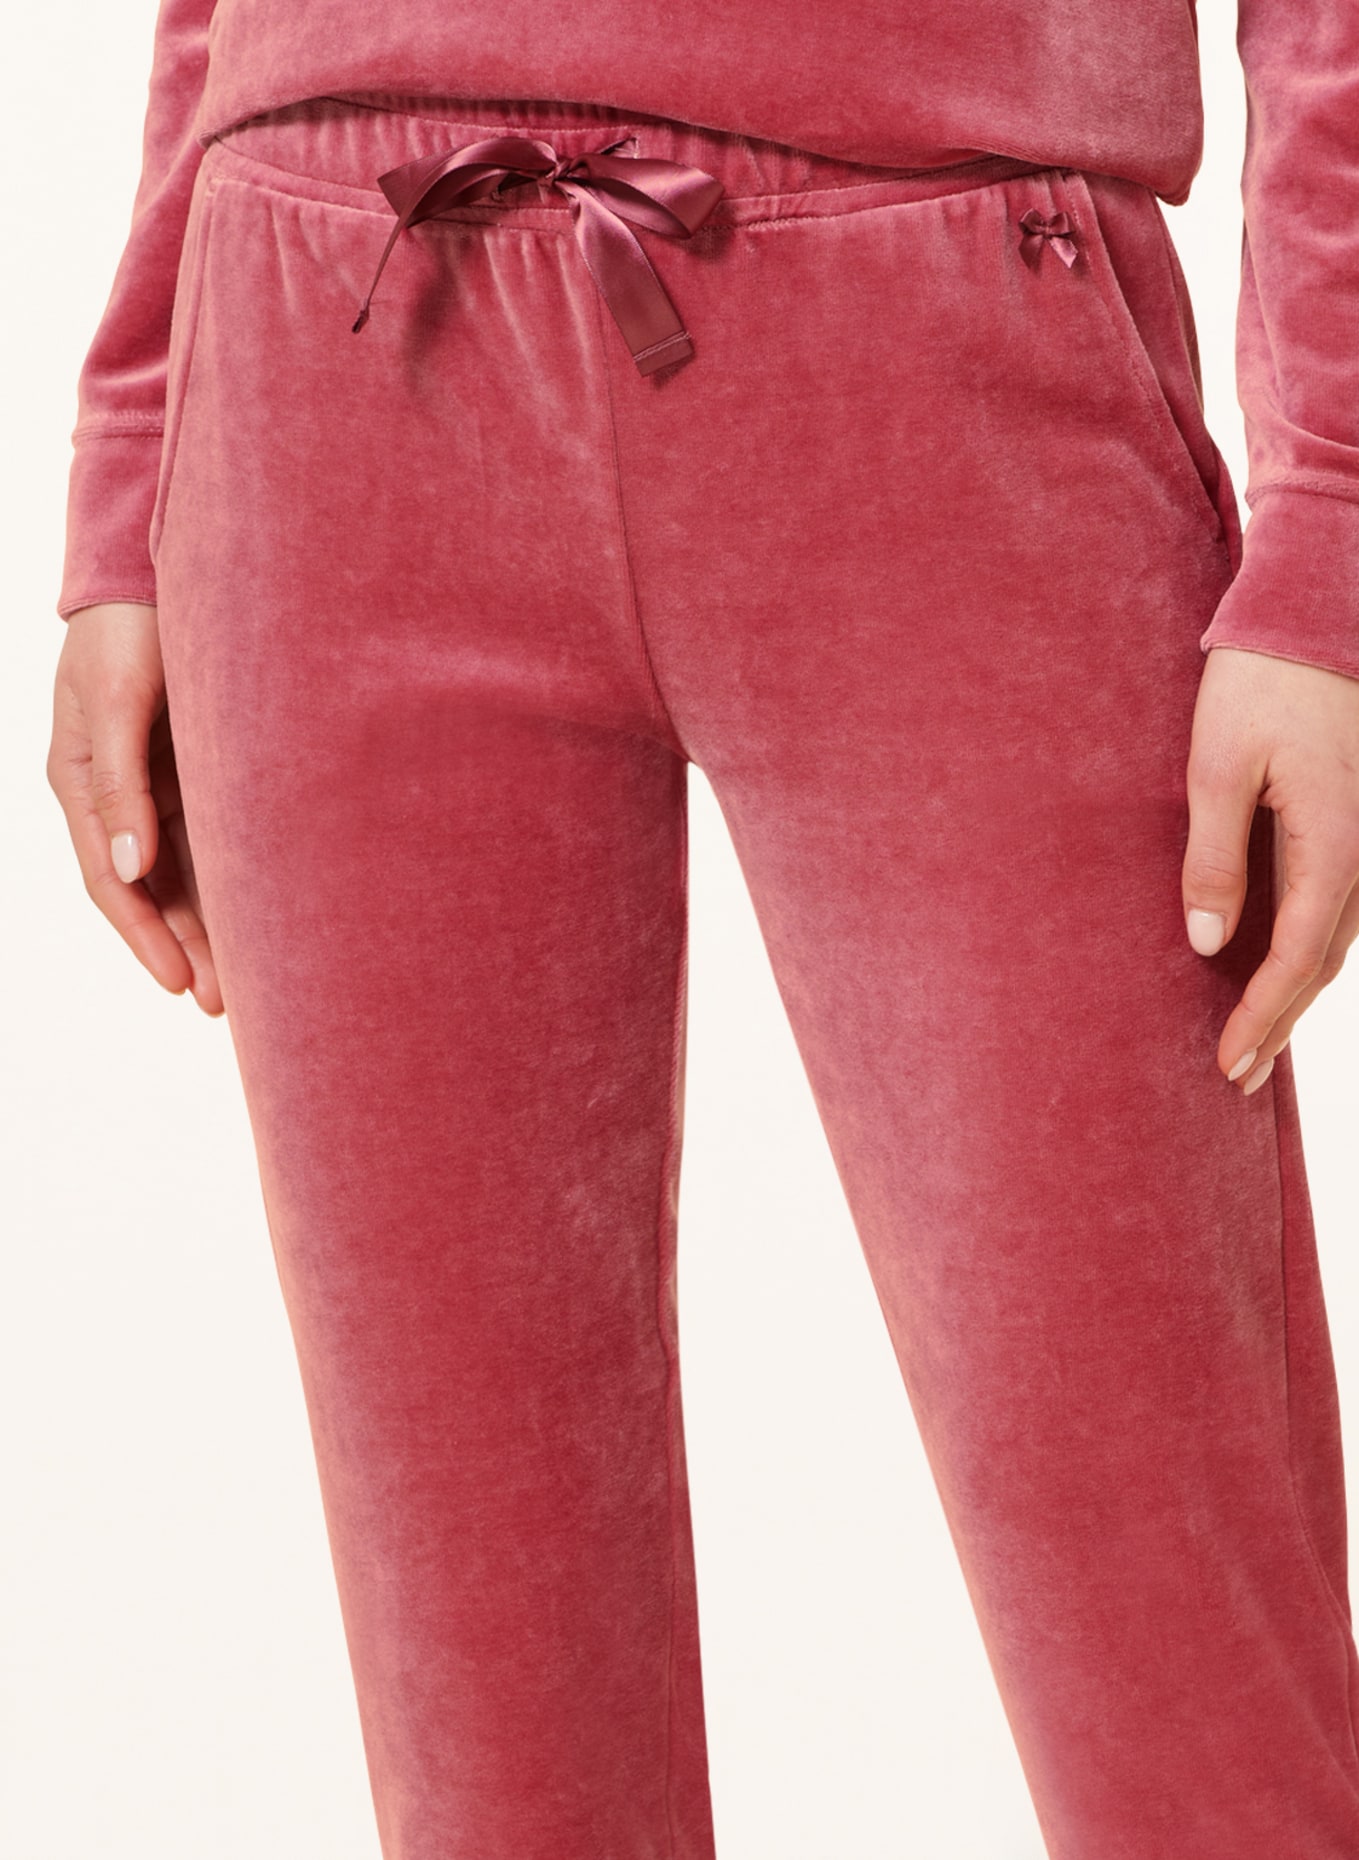 SHORT STORIES Lounge pants made of velour, Color: FUCHSIA (Image 5)